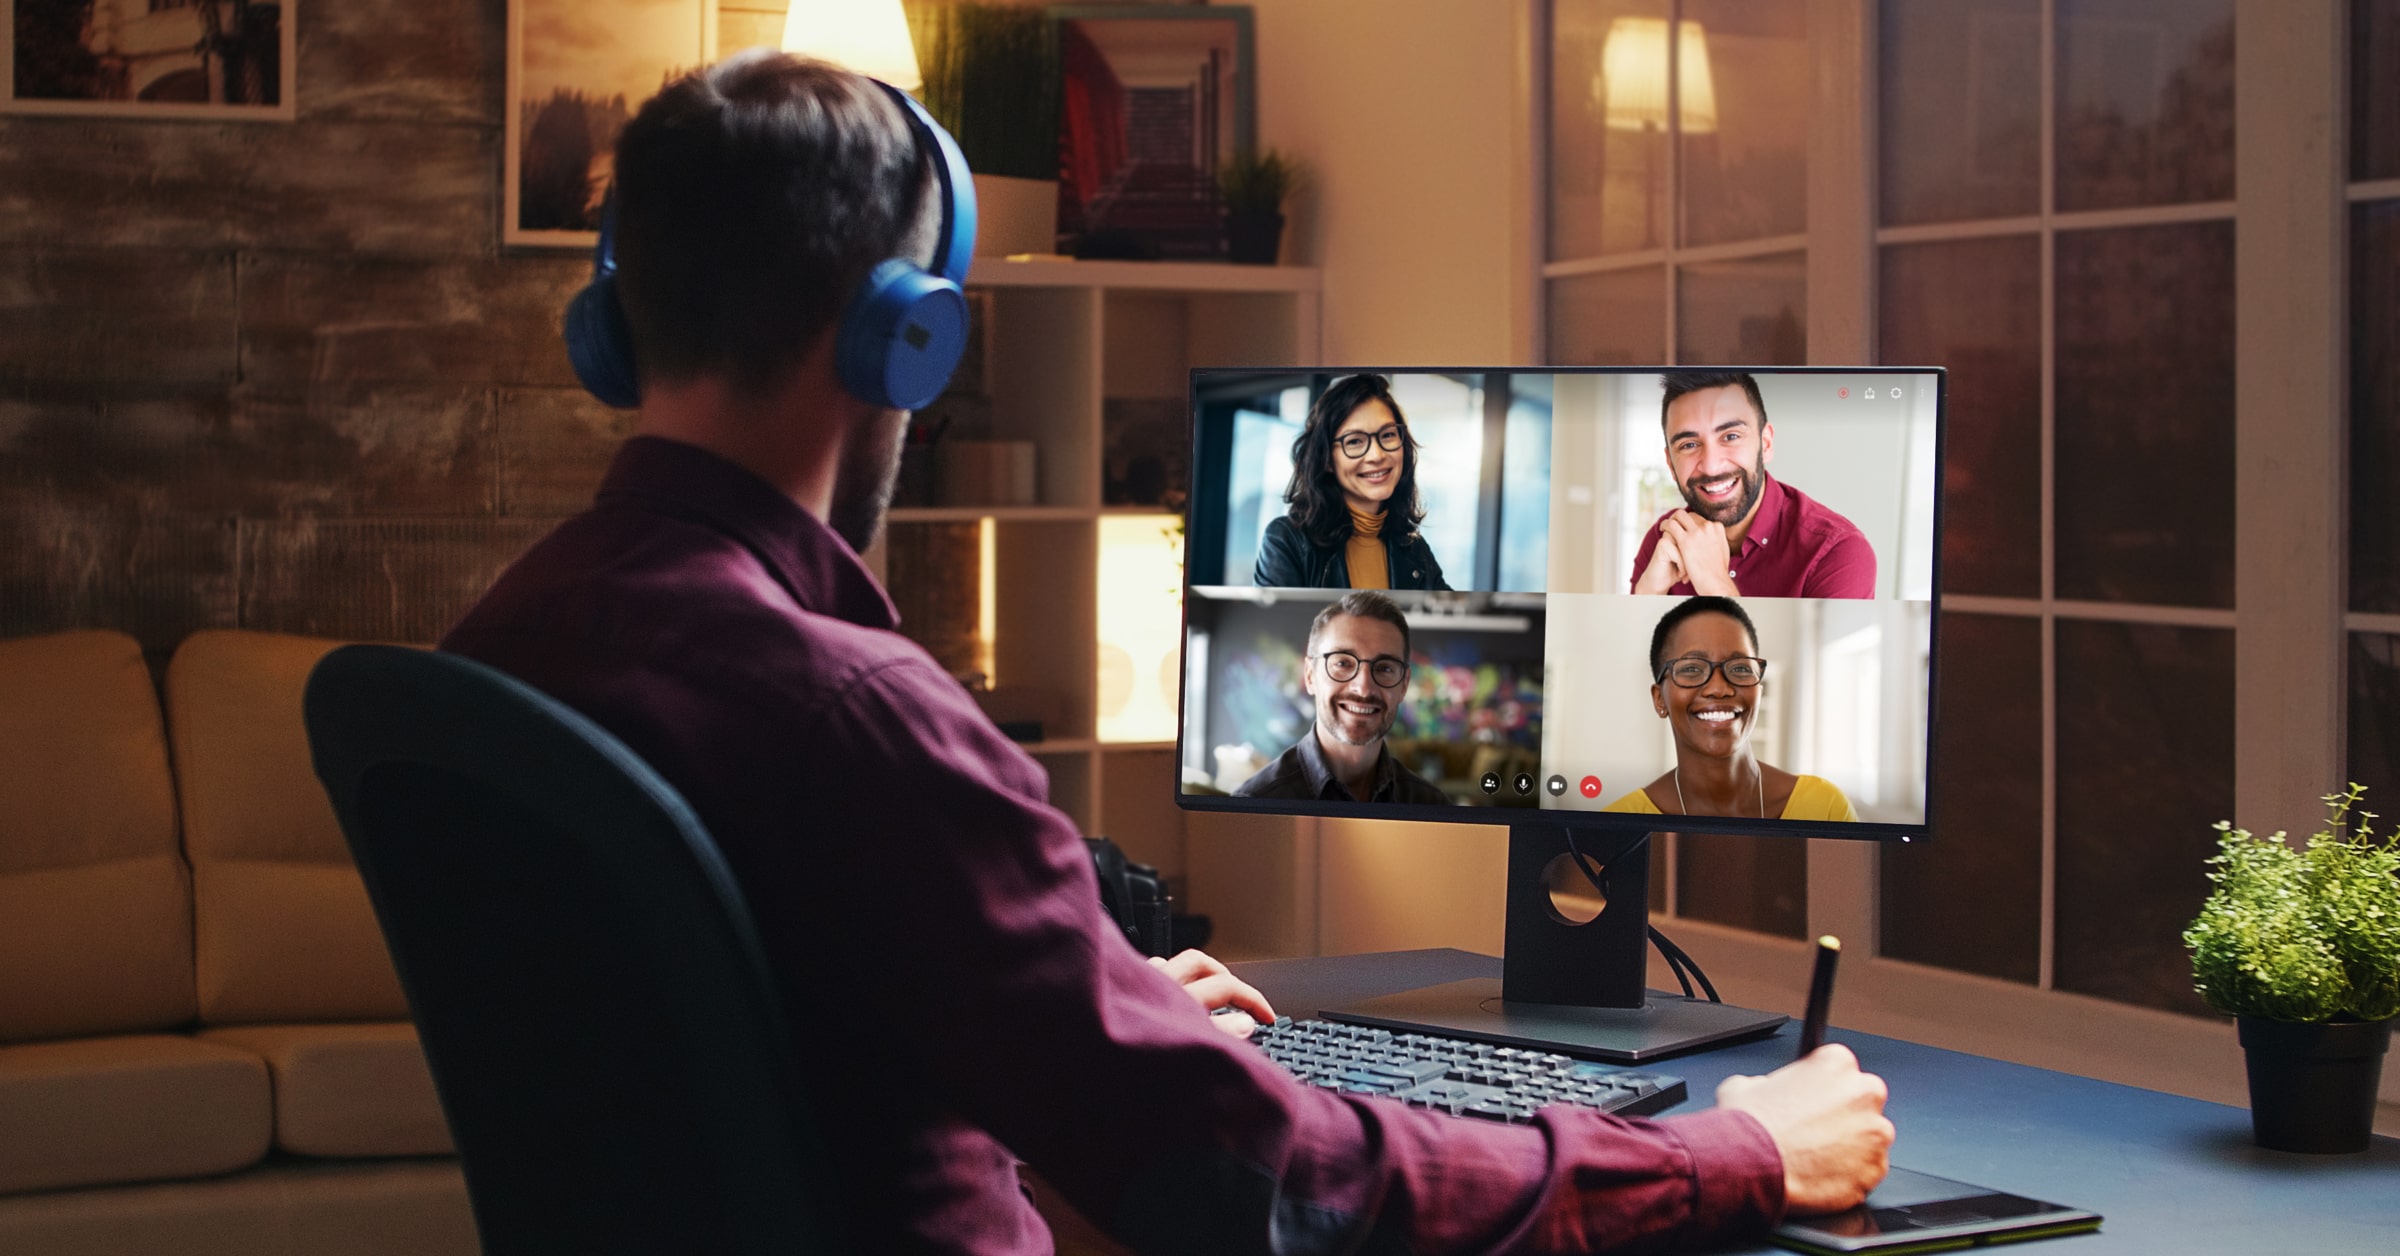 The worst mistake a leader can make on a video call